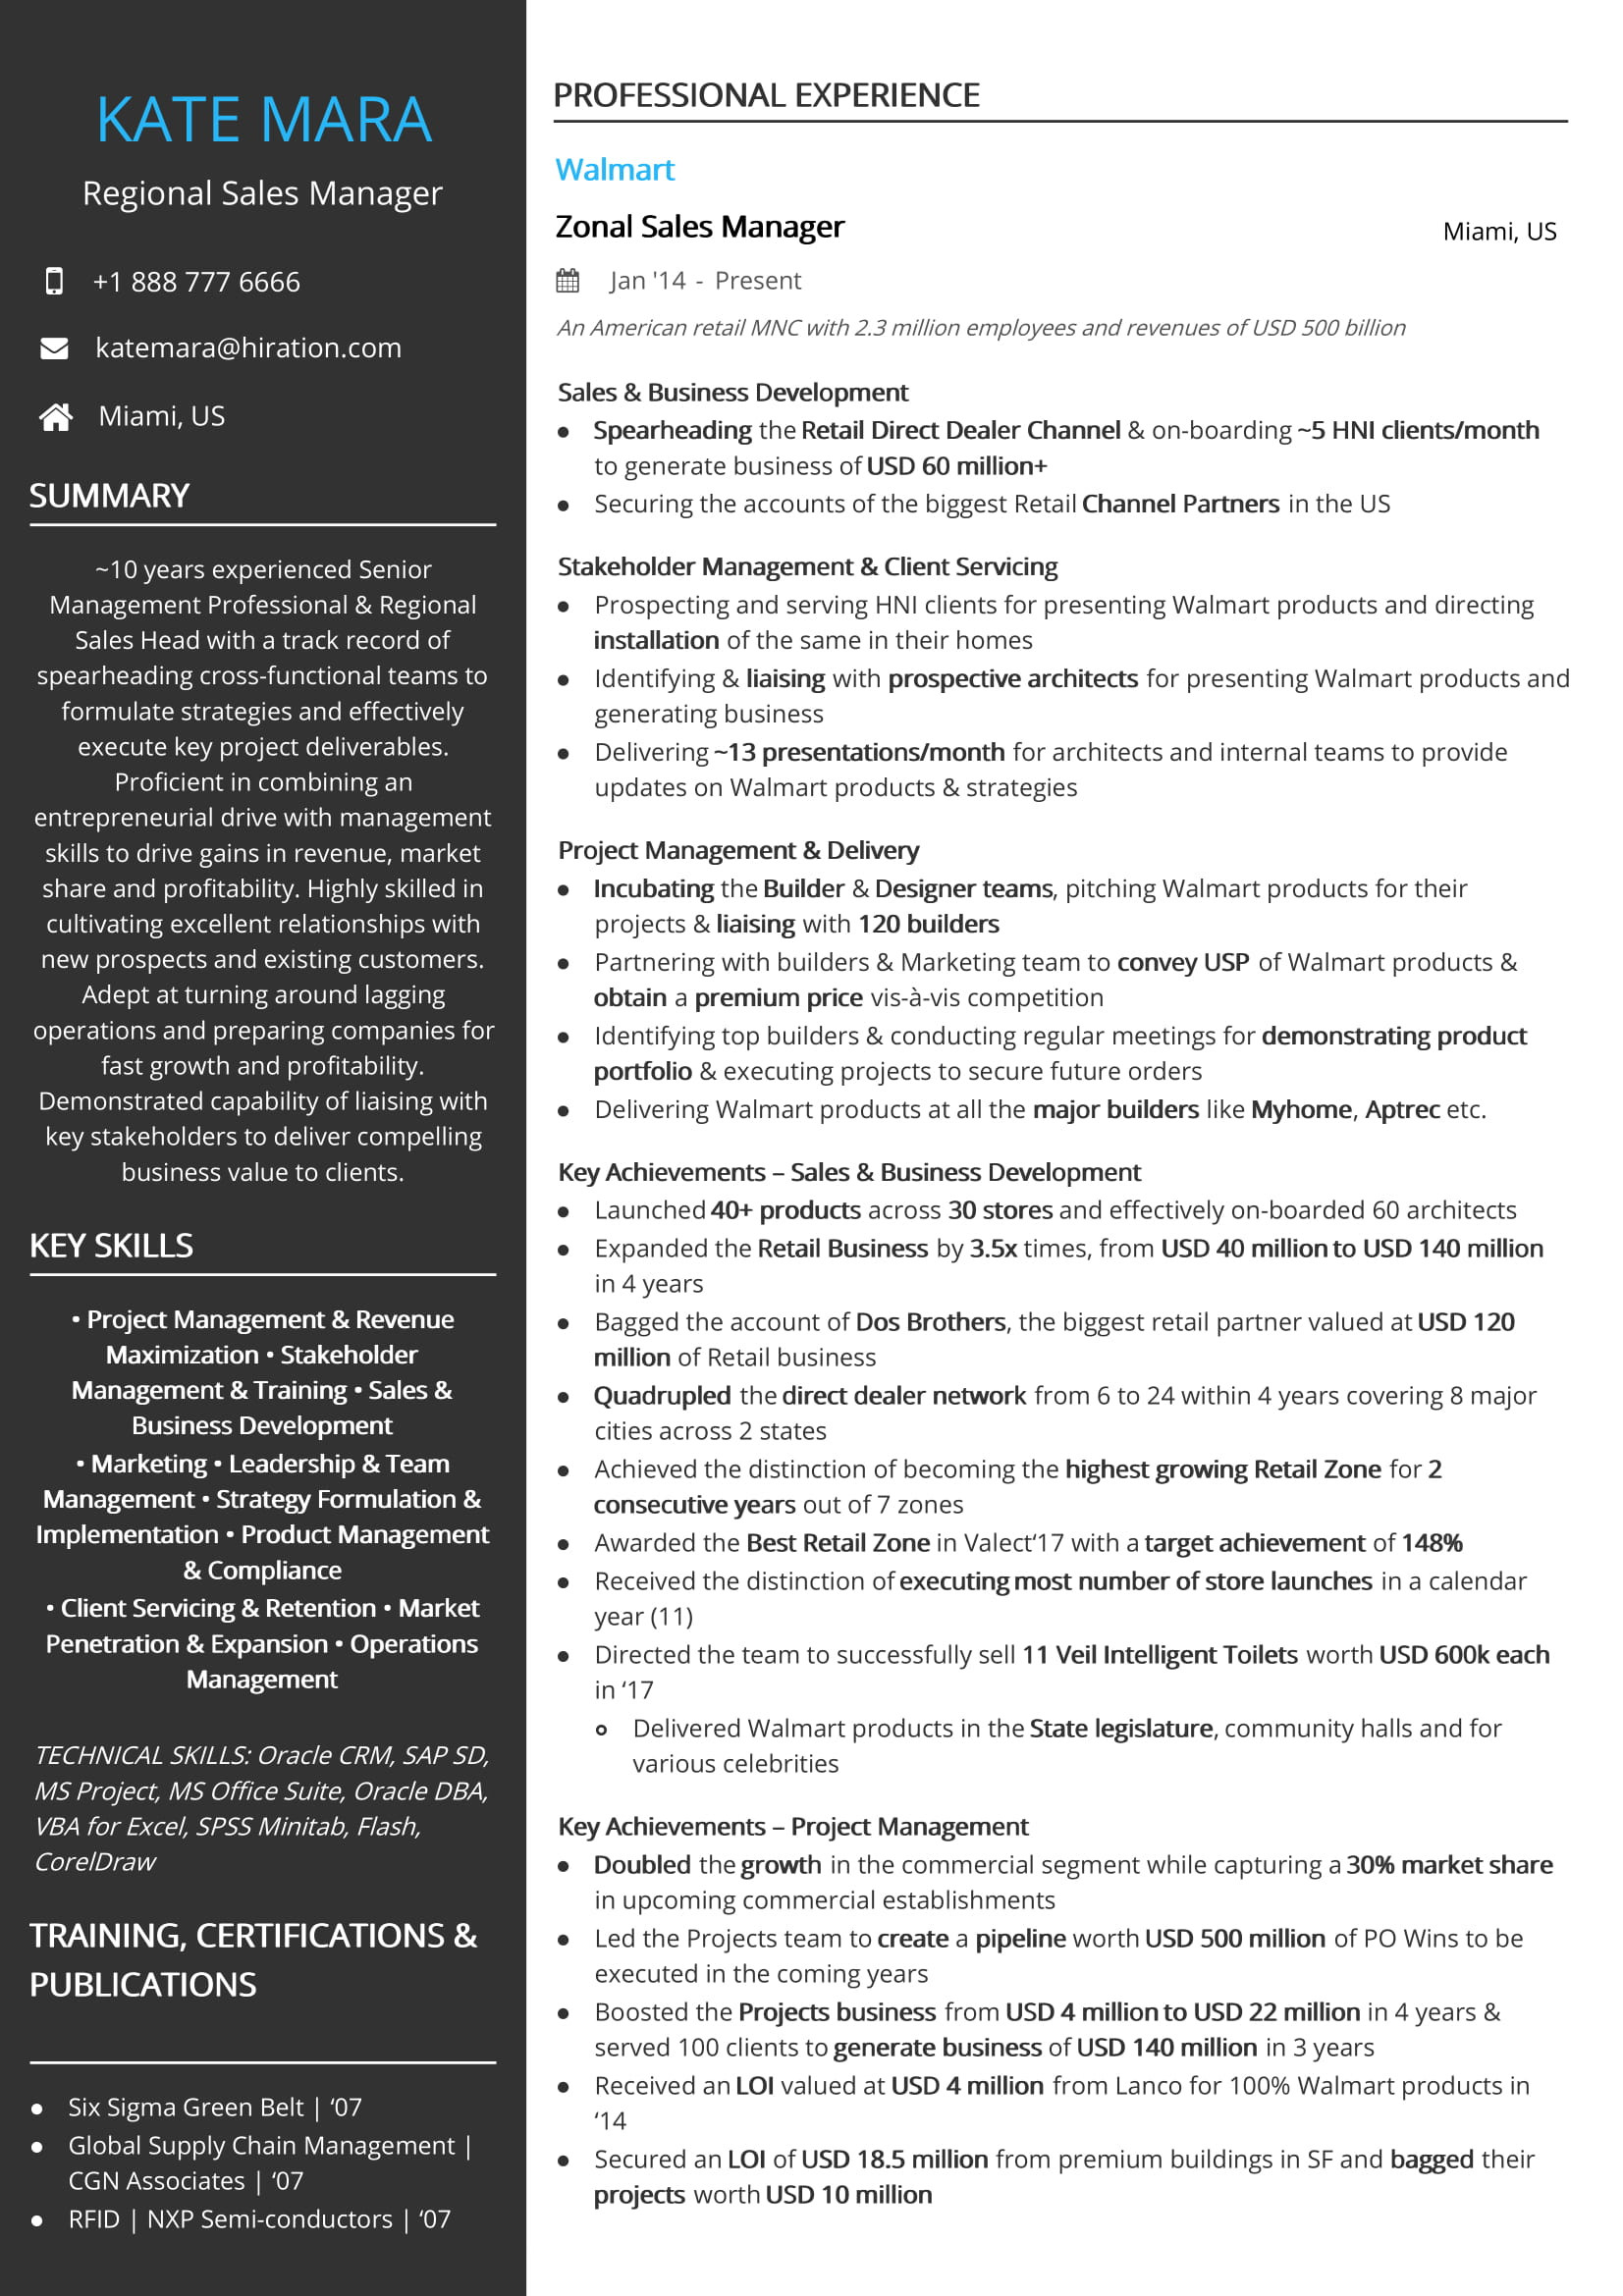 Walmart Customer Service Manager Resume Sample Free Regional Sales Manager Resume Sample 2020 by Hiration